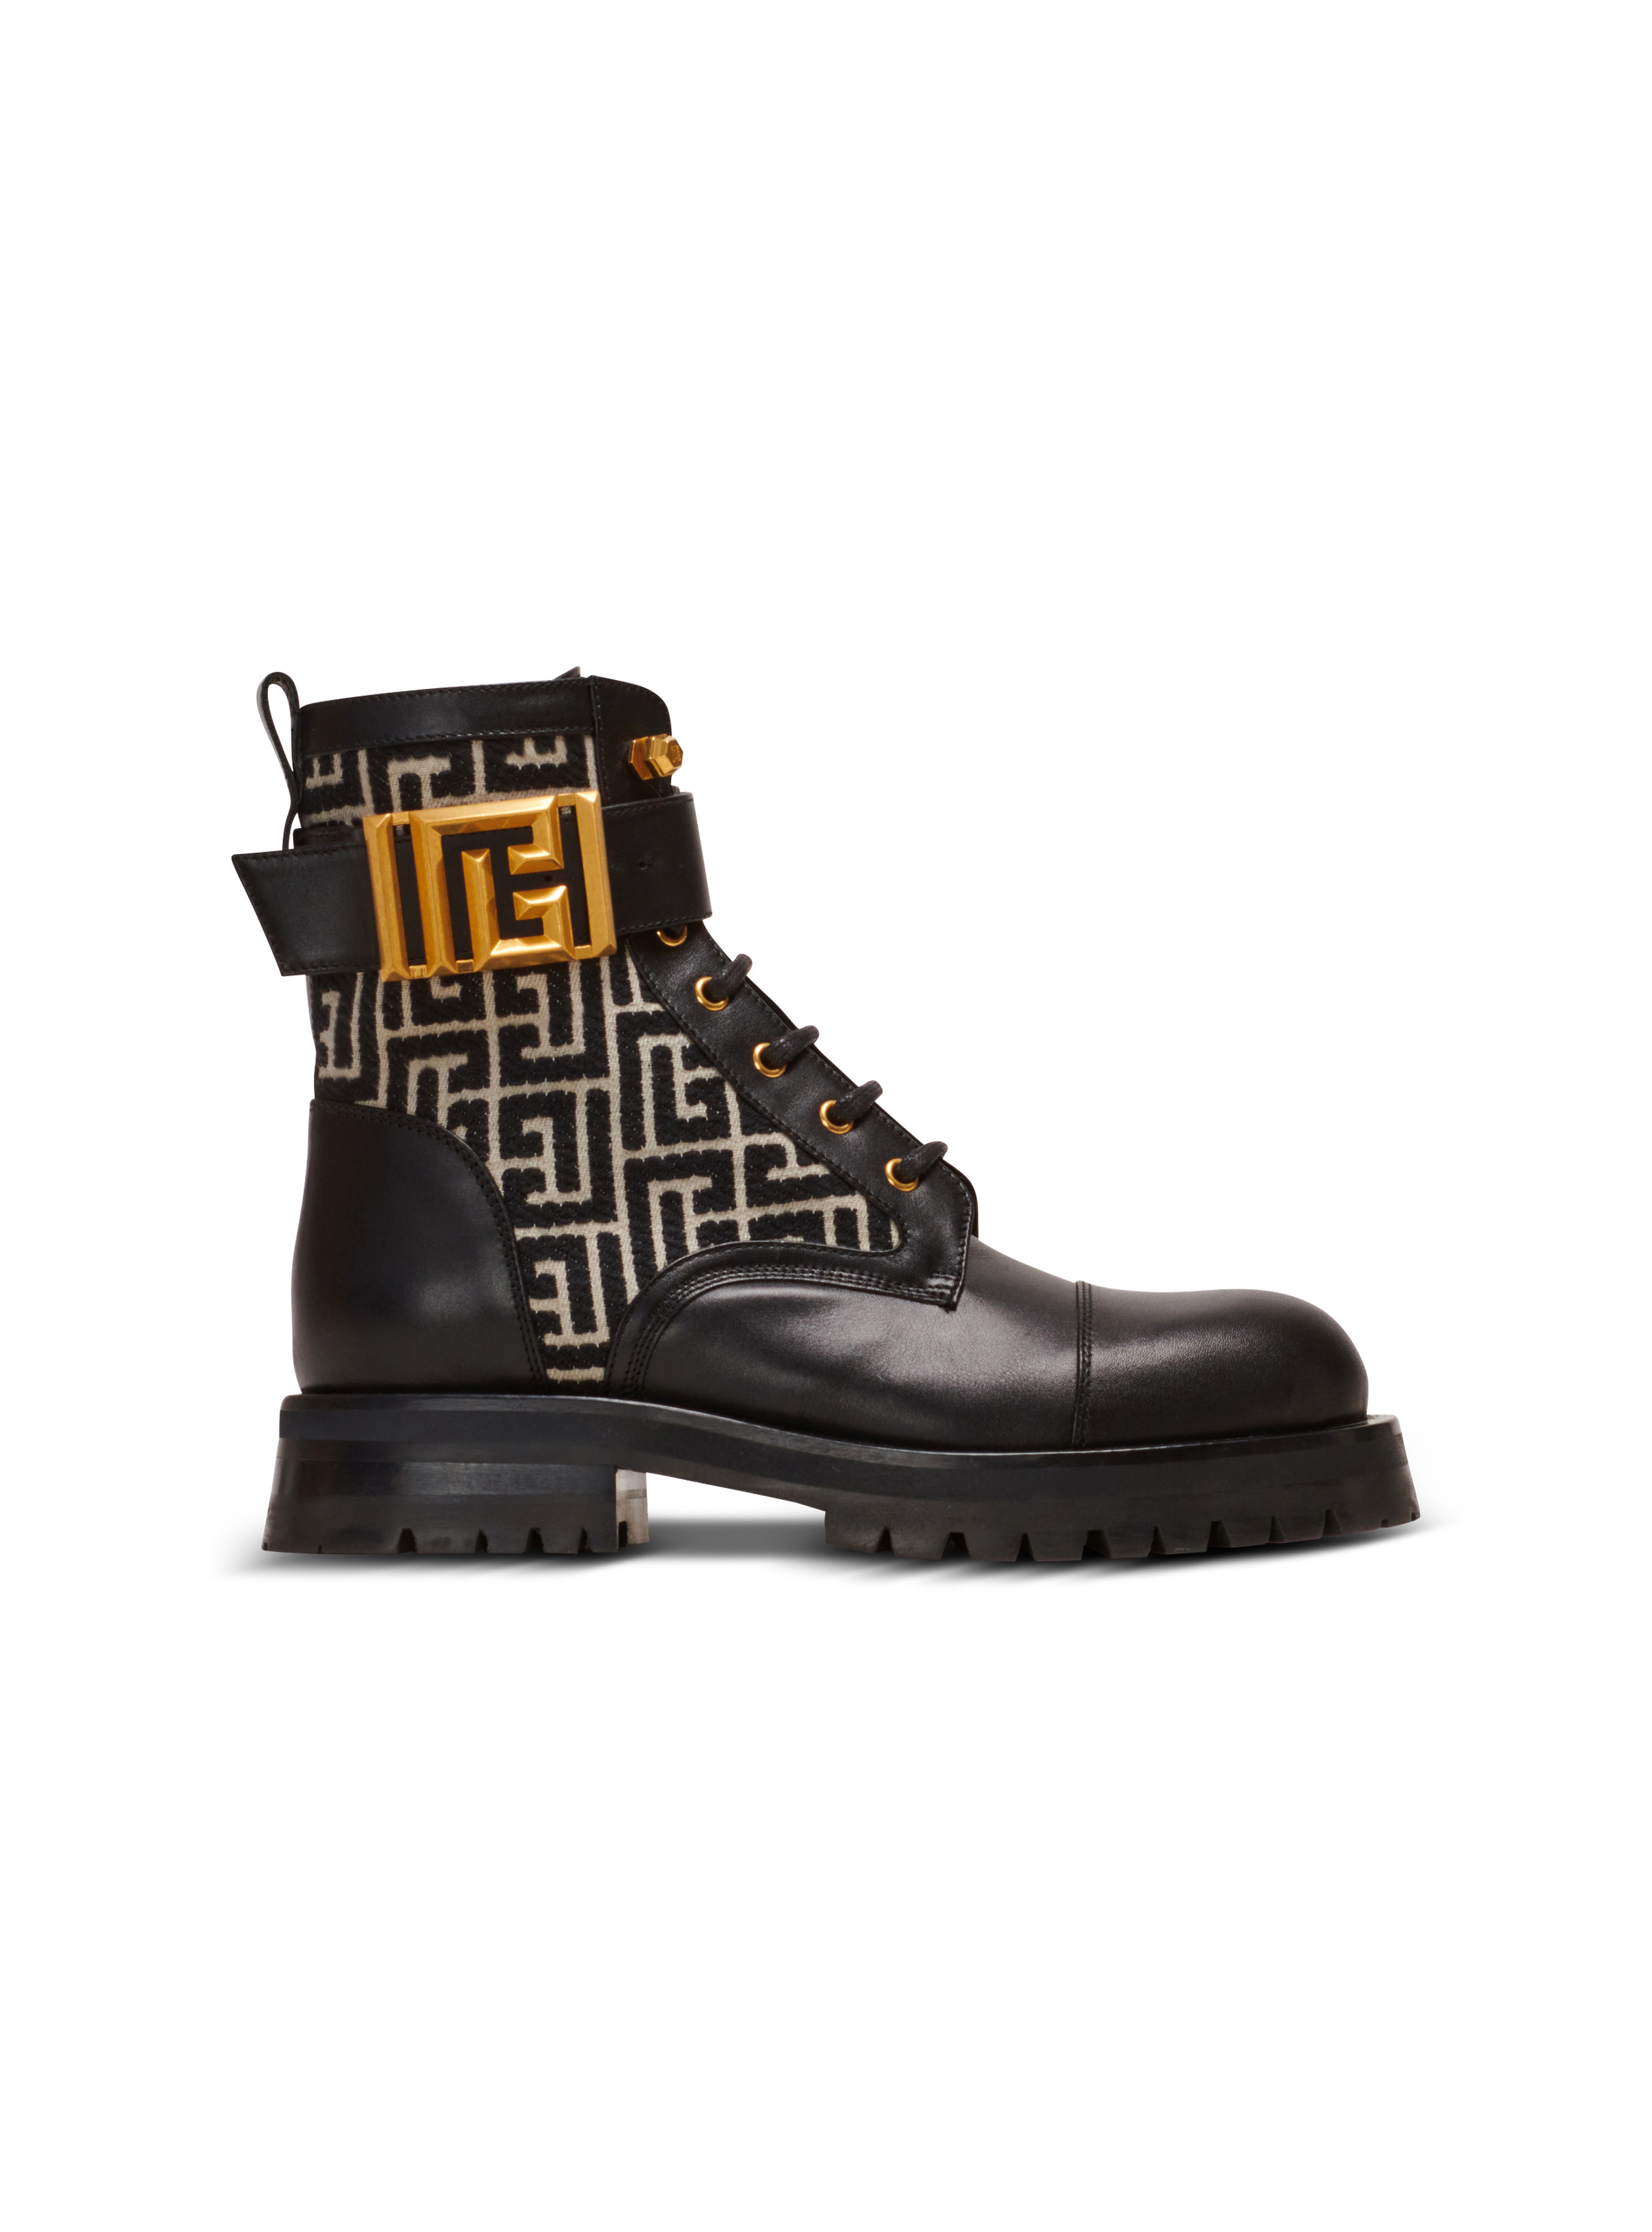 Charlie monogram jacquard and leather ranger boots - 1